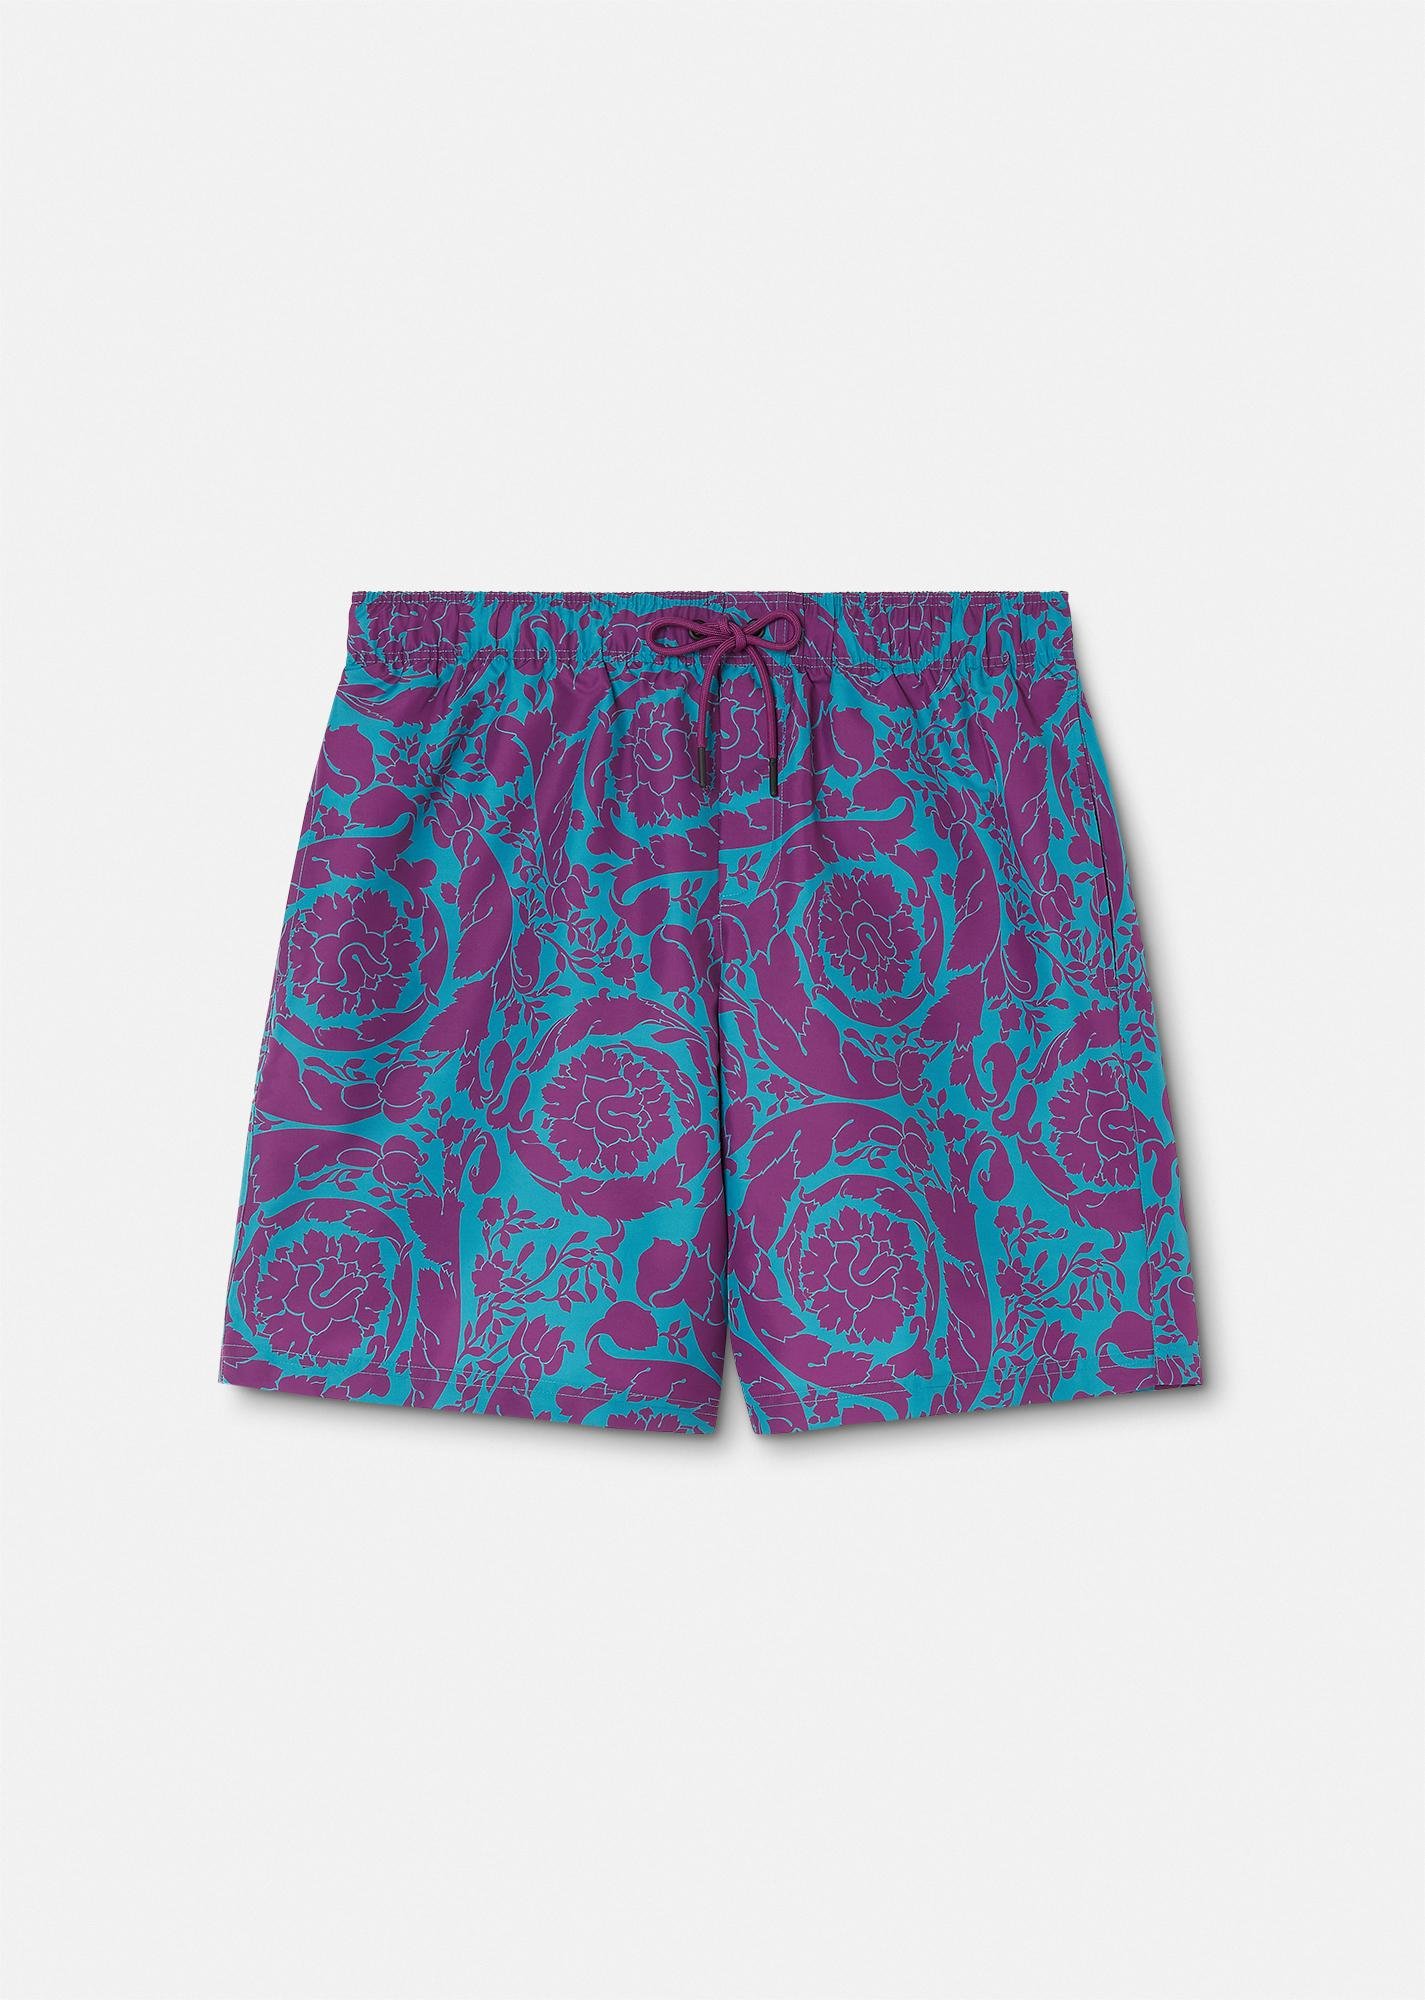 Barocco Silhouette Boardshorts by VERSACE